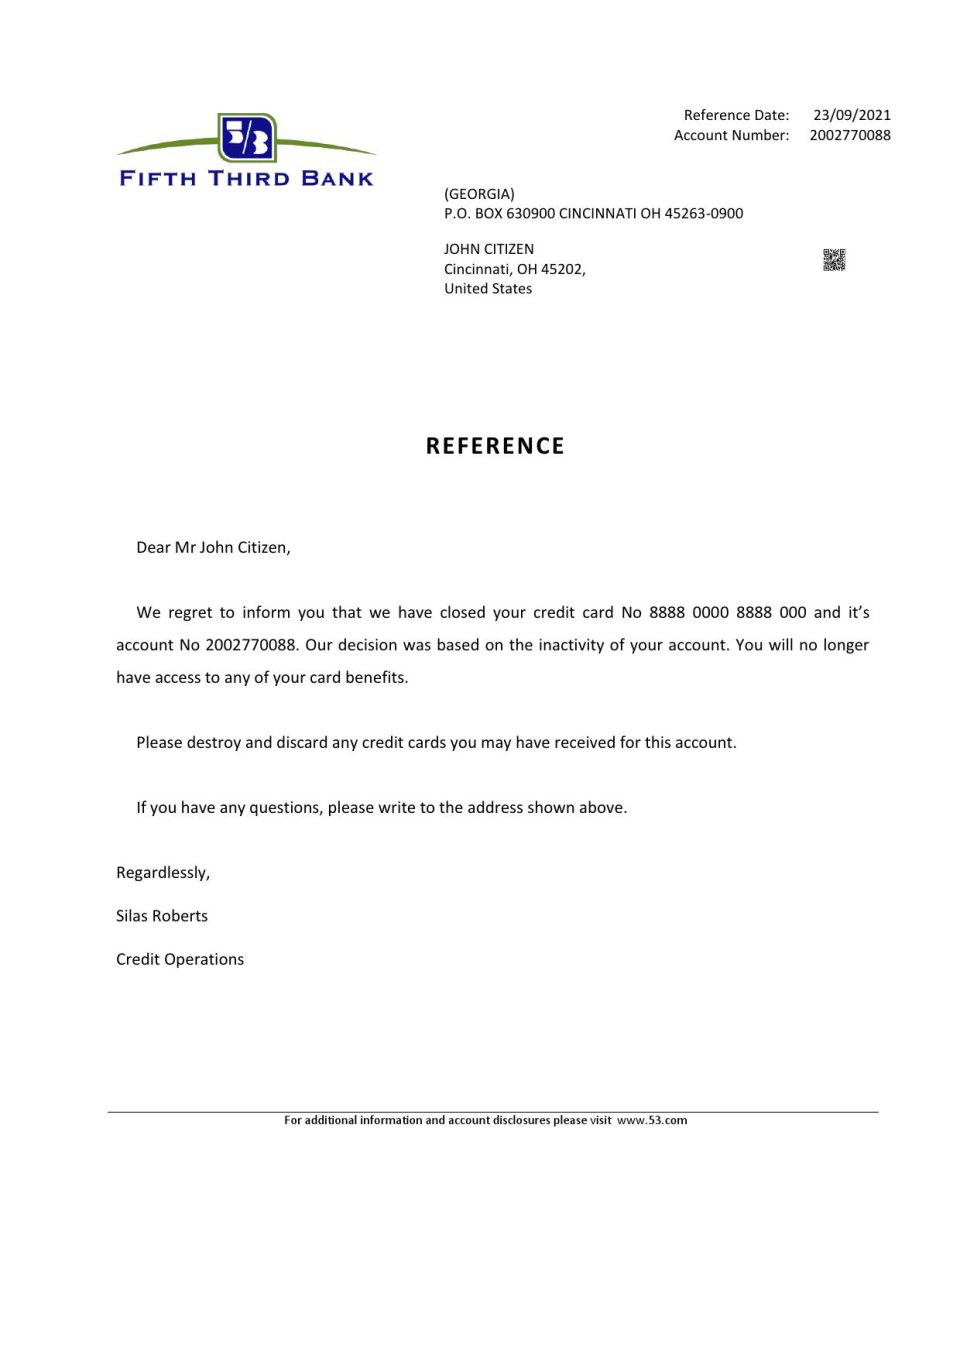 Download USA Fifth Third Bank Reference Letter Templates | Editable Word